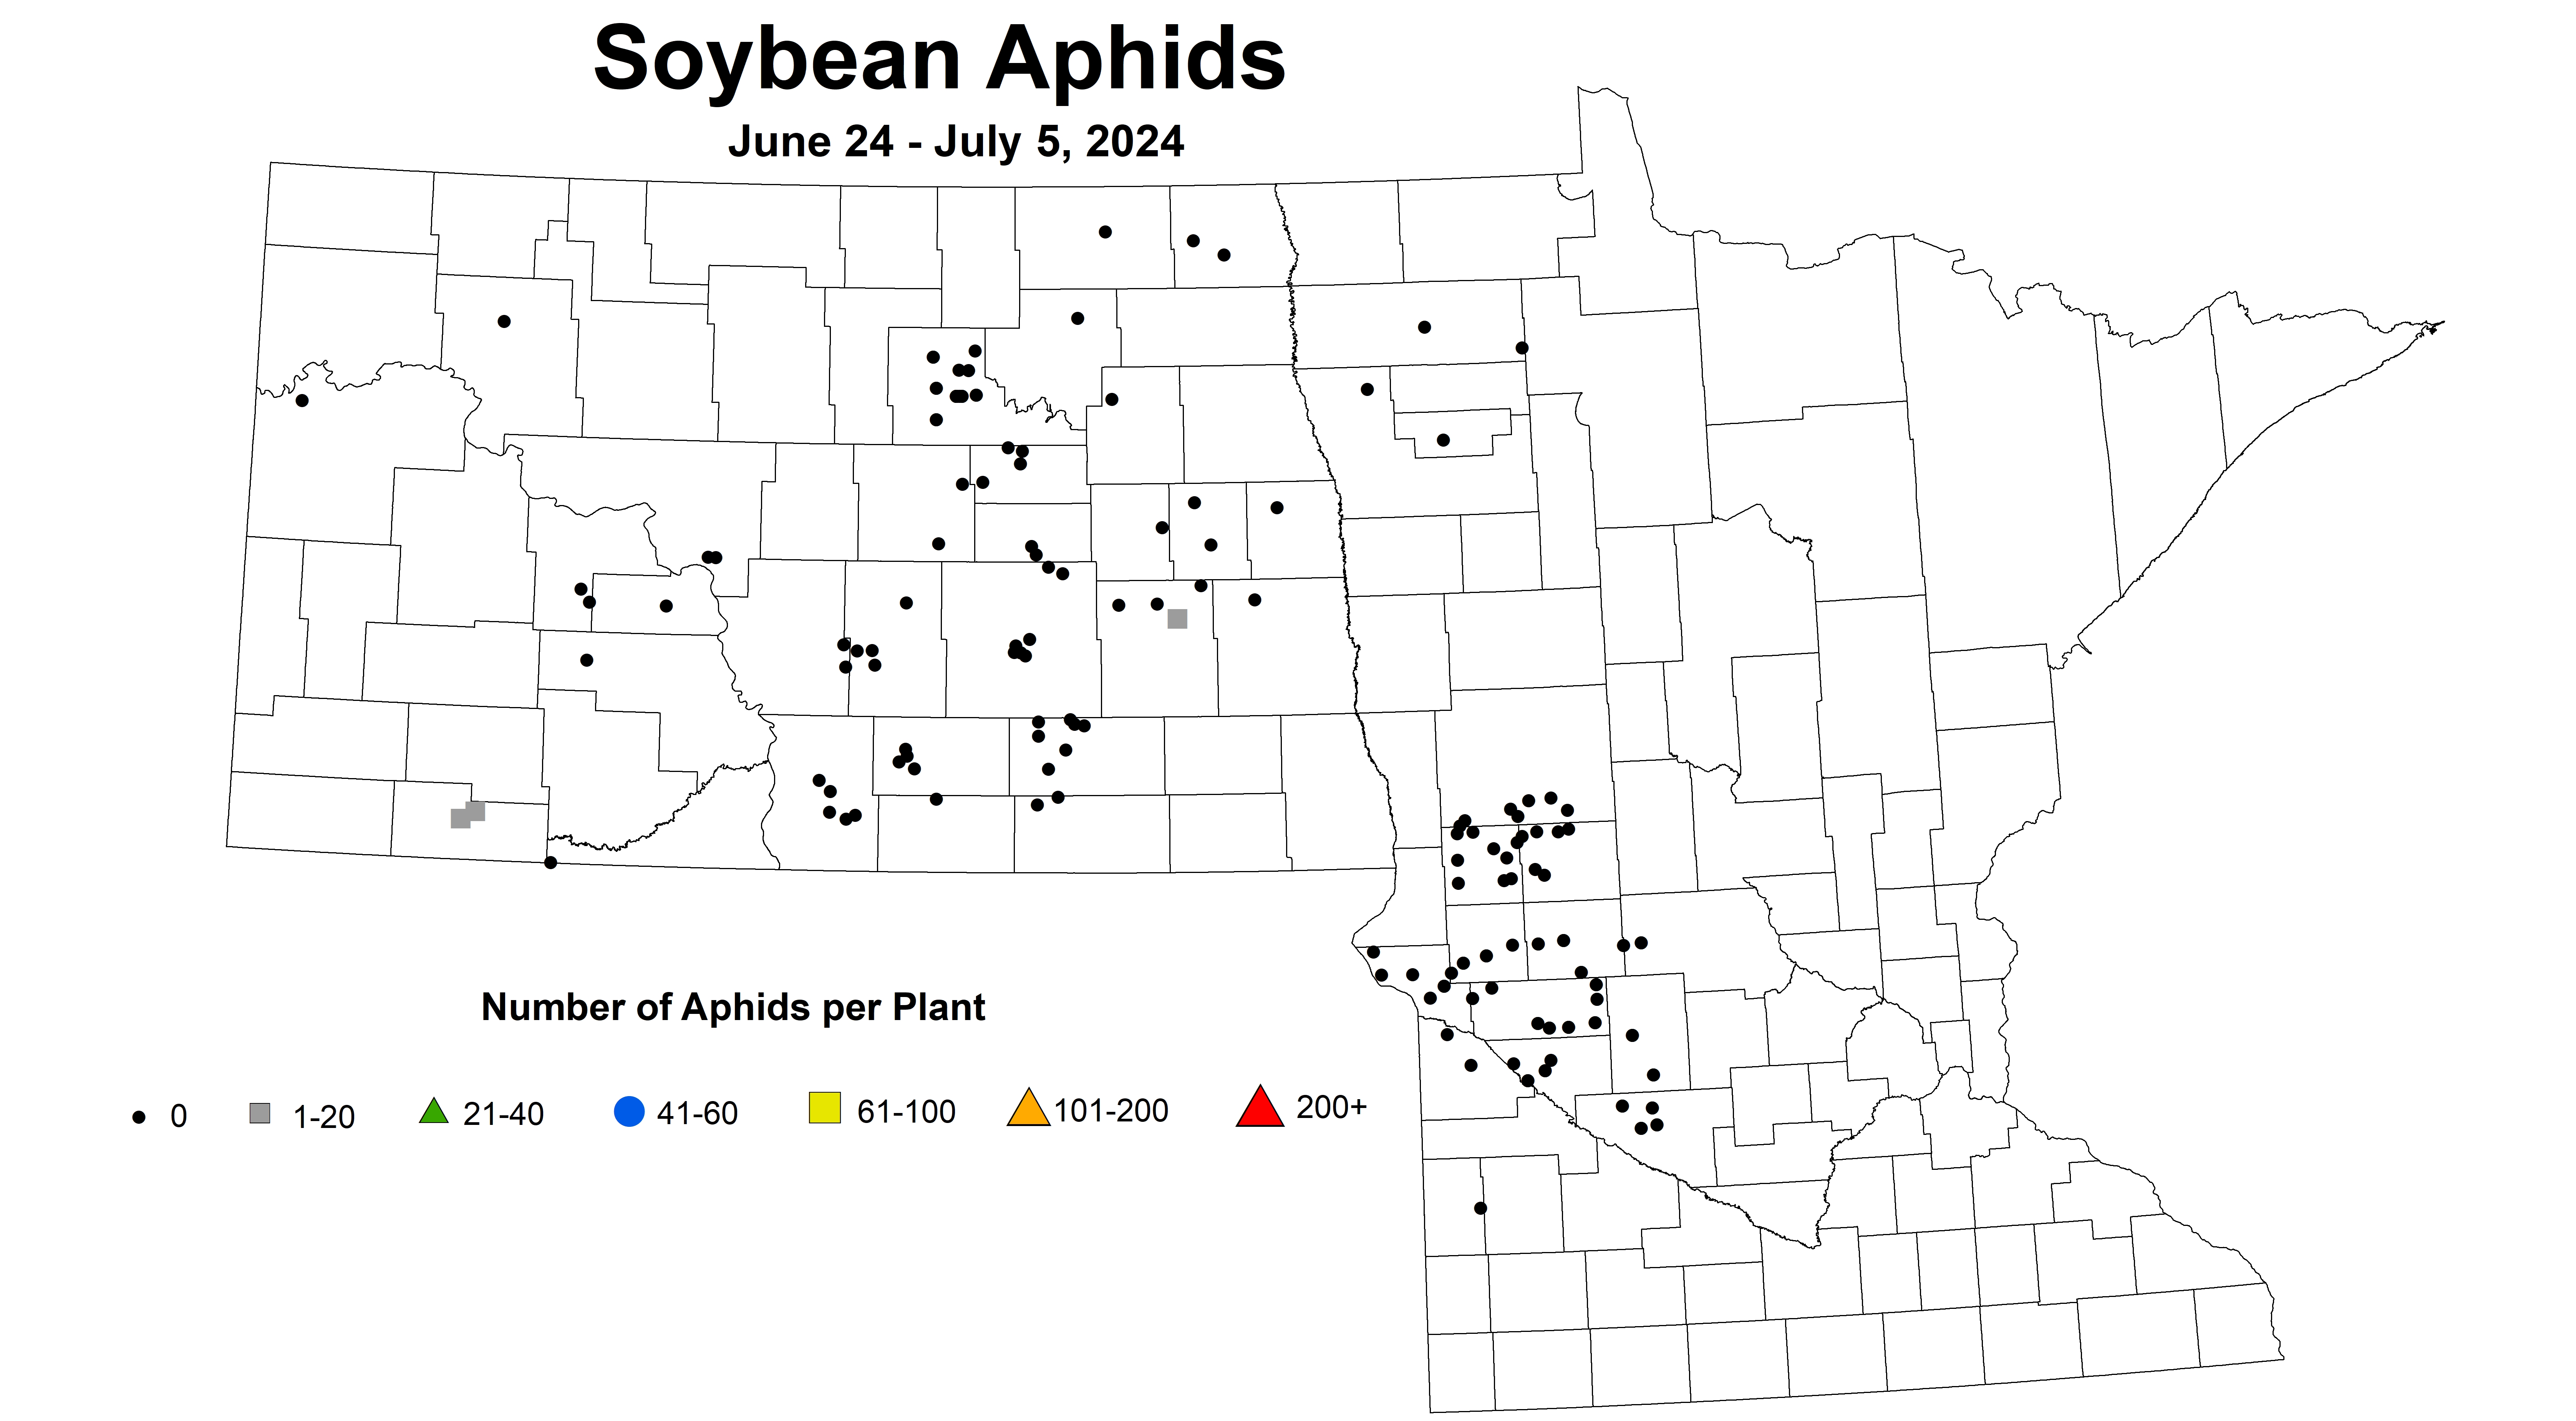 soybean aphid number June 24 to July 5 2024